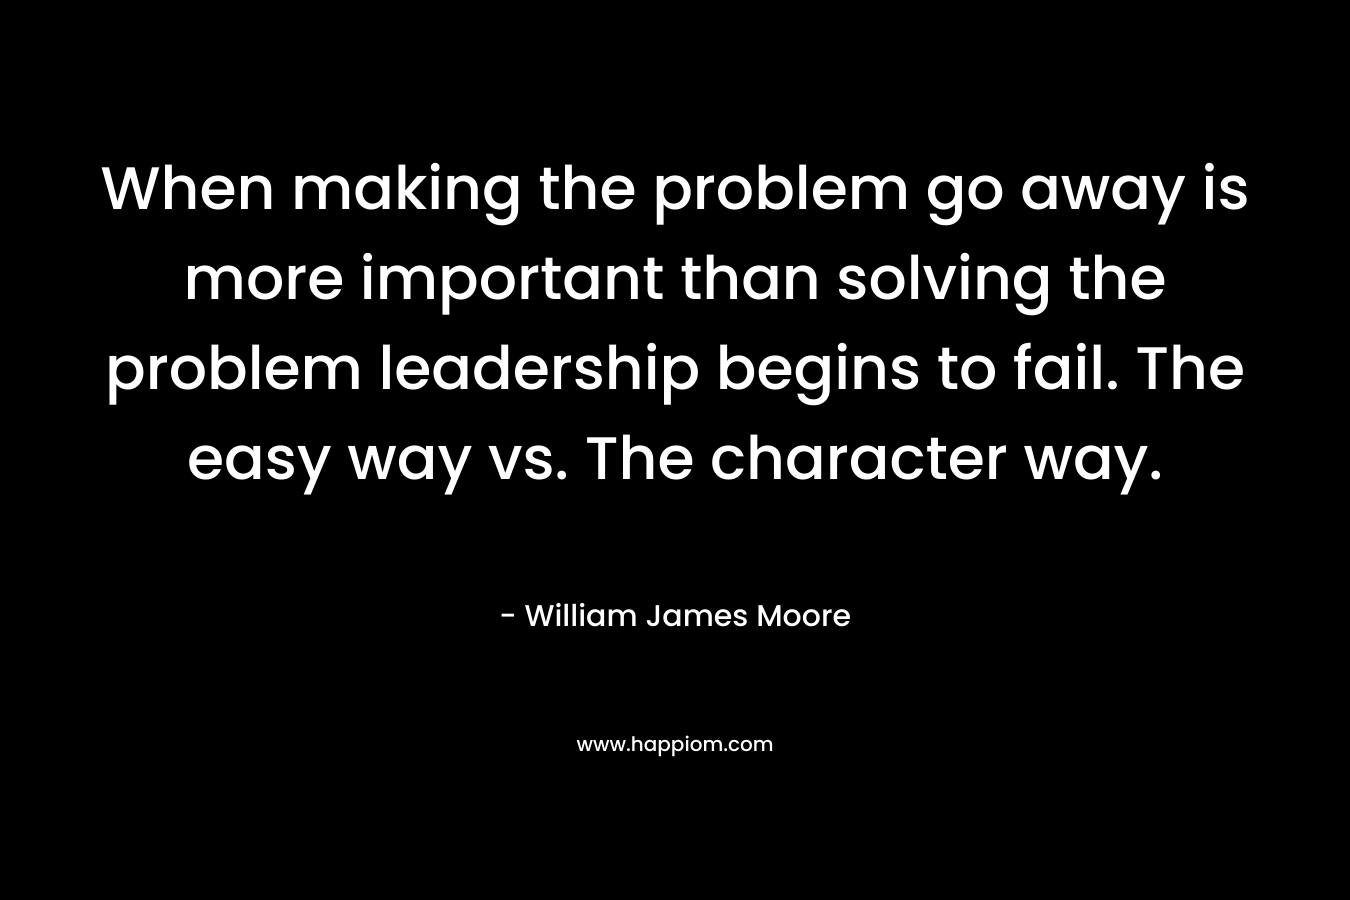 When making the problem go away is more important than solving the problem leadership begins to fail. The easy way vs. The character way. – William James Moore